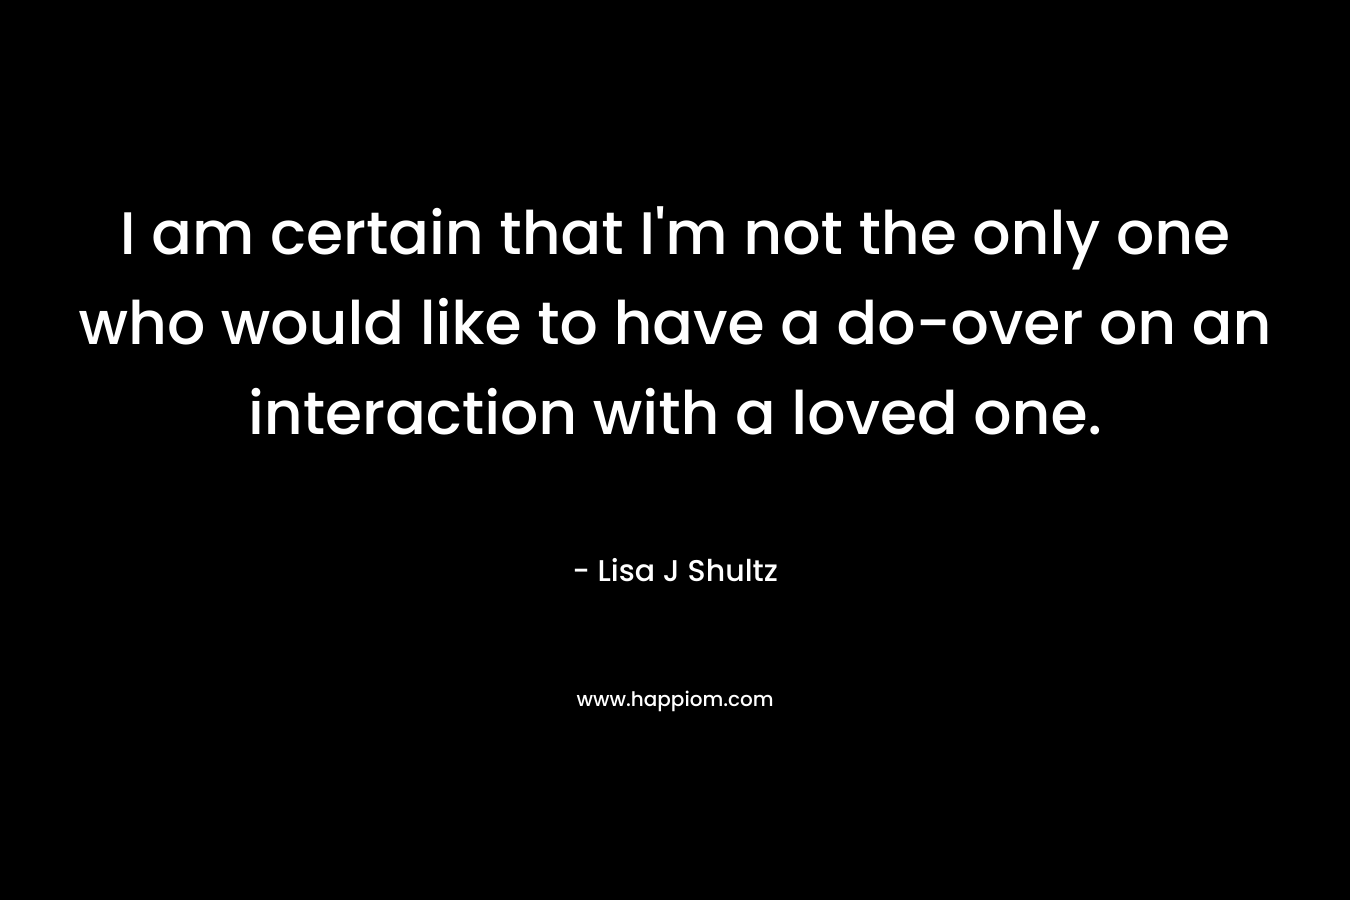 I am certain that I’m not the only one who would like to have a do-over on an interaction with a loved one. – Lisa J Shultz